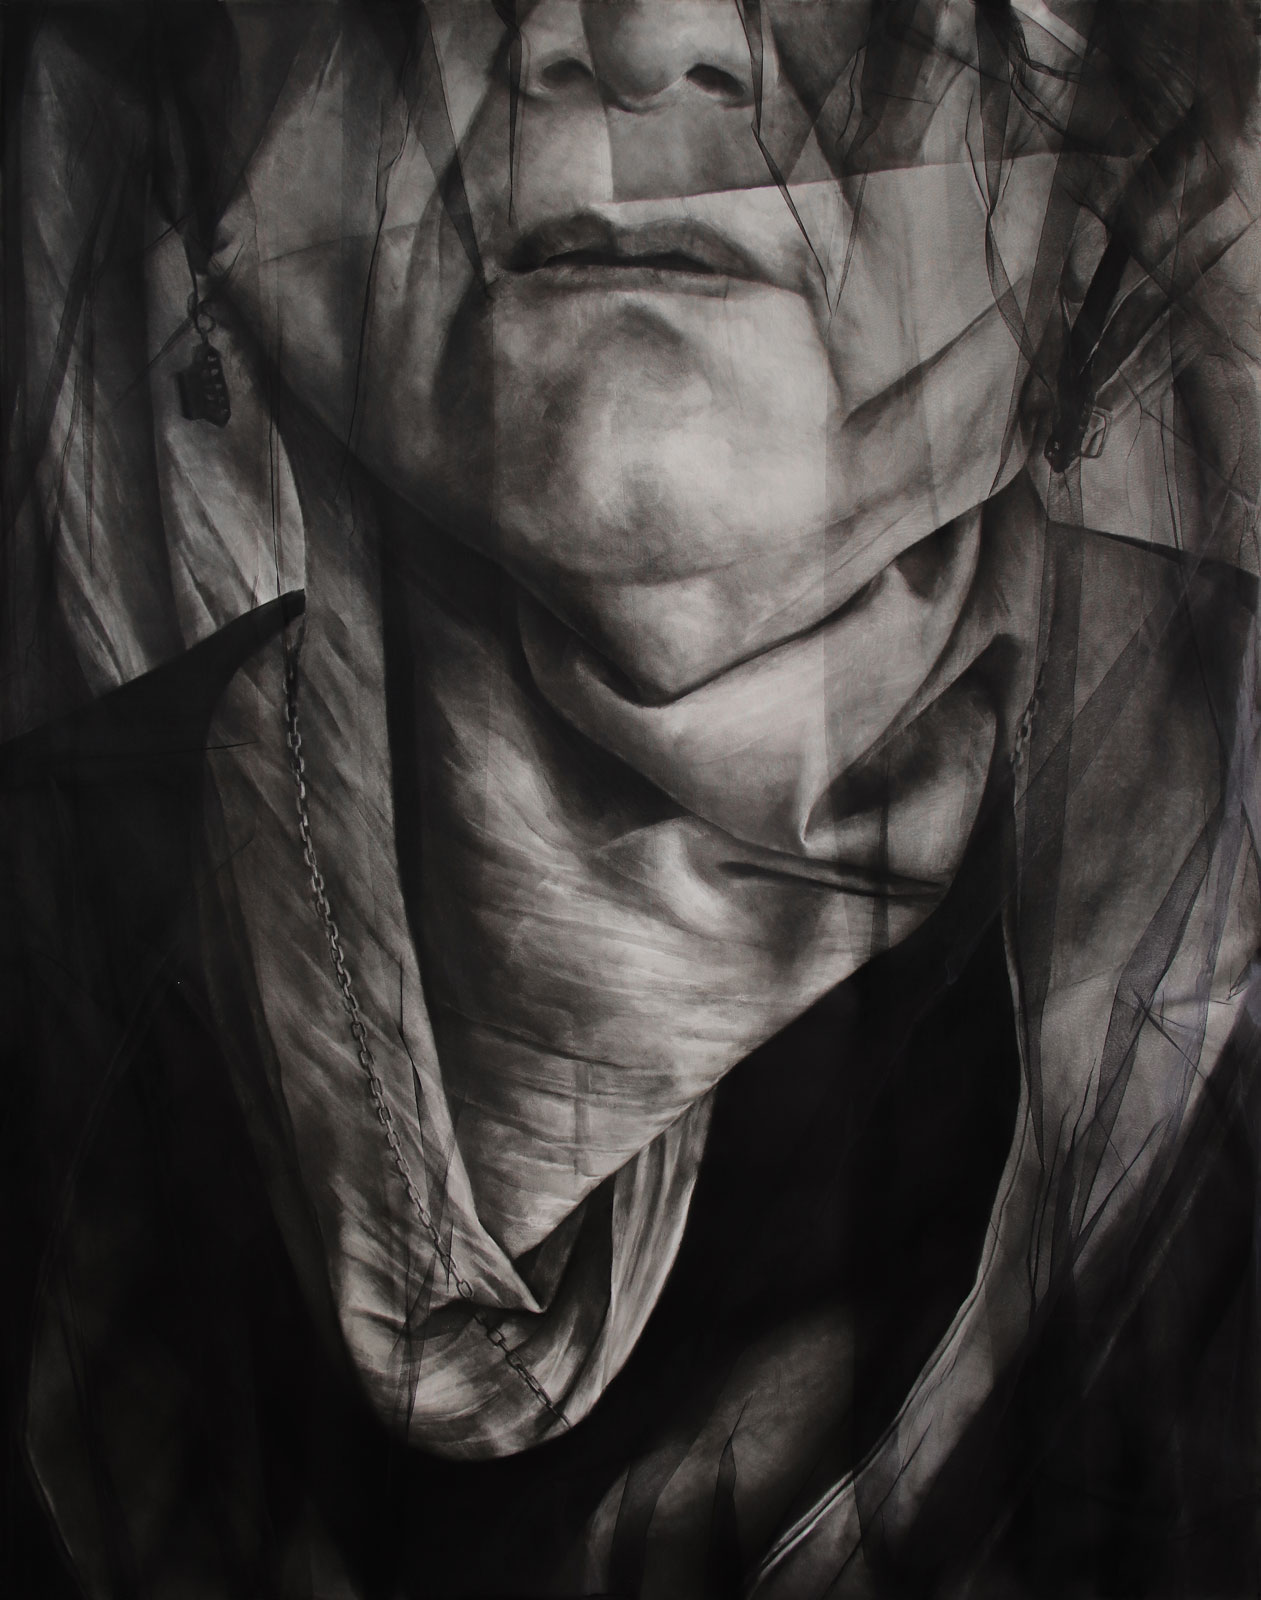 <p>190.150 cm, charcoal on paper & covered by lace</p>